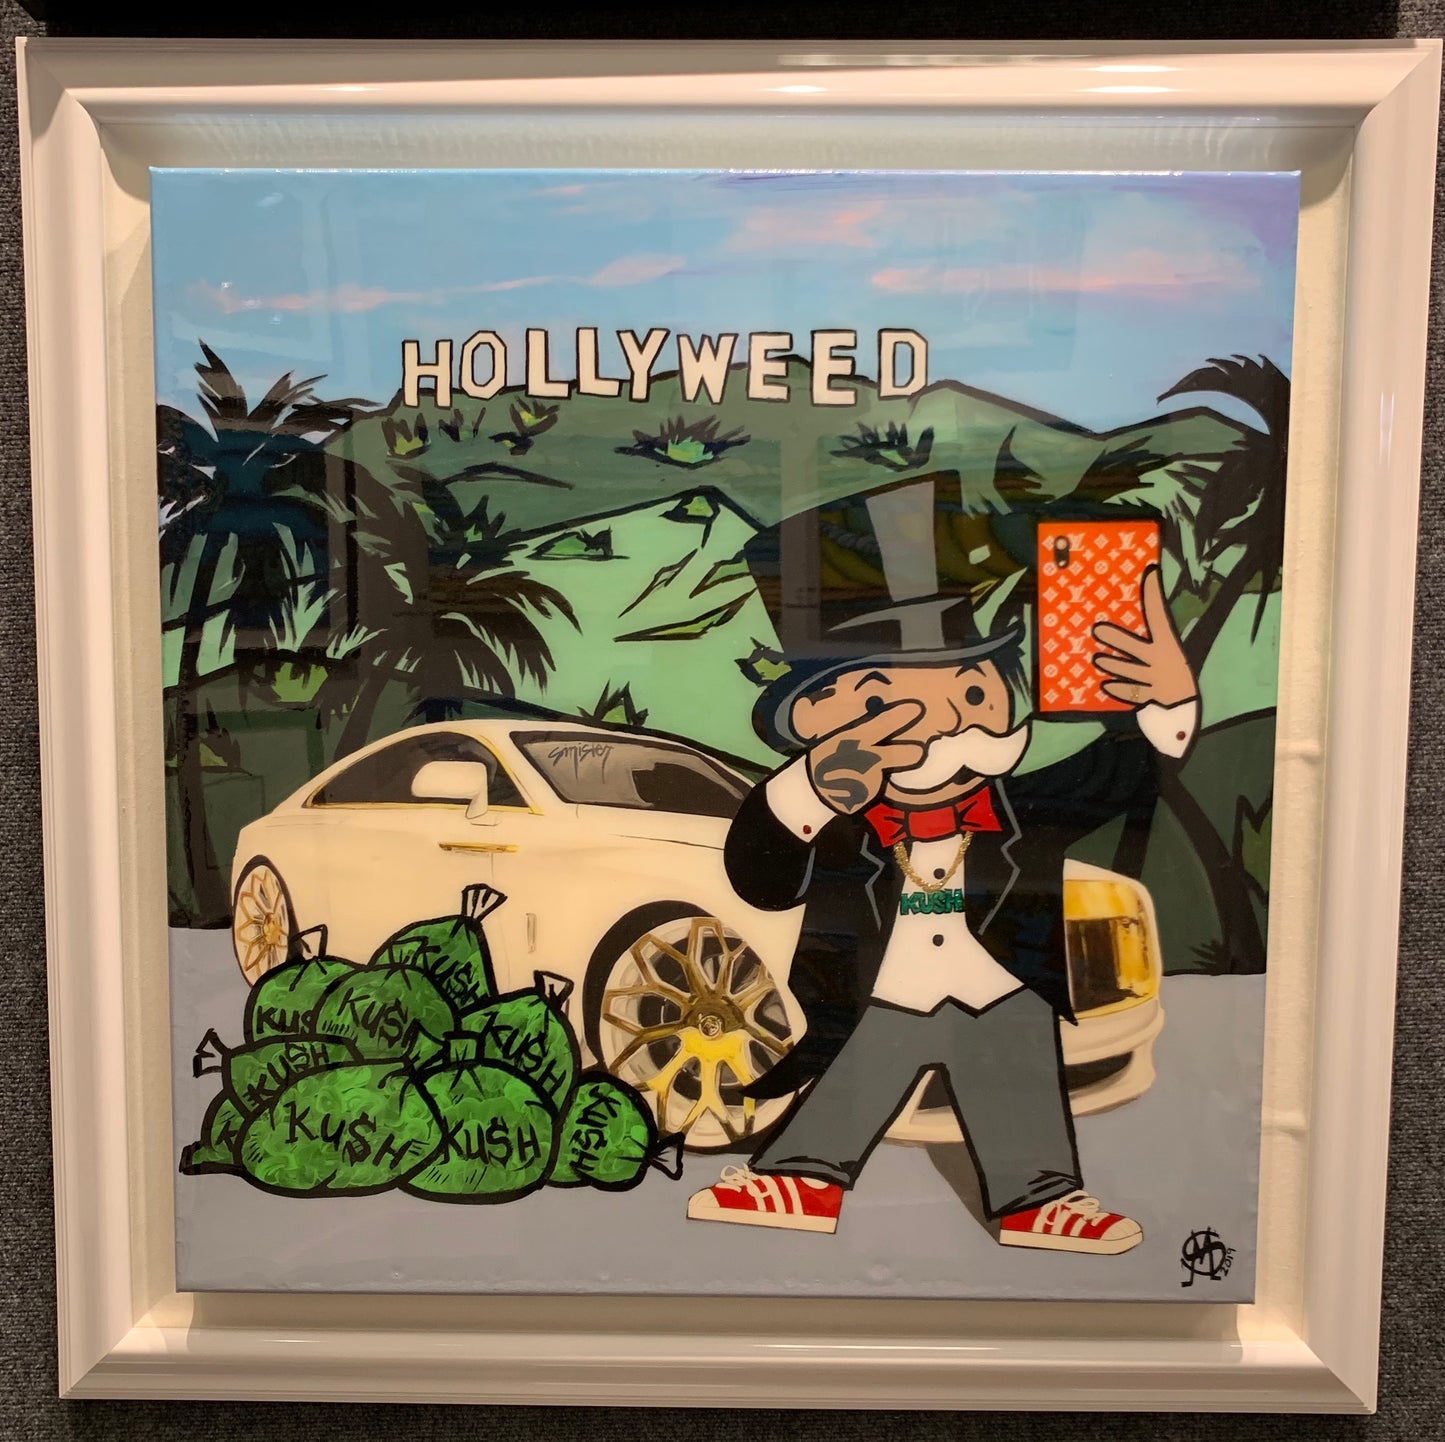 Sinister Monopoly “Hollyweed” 